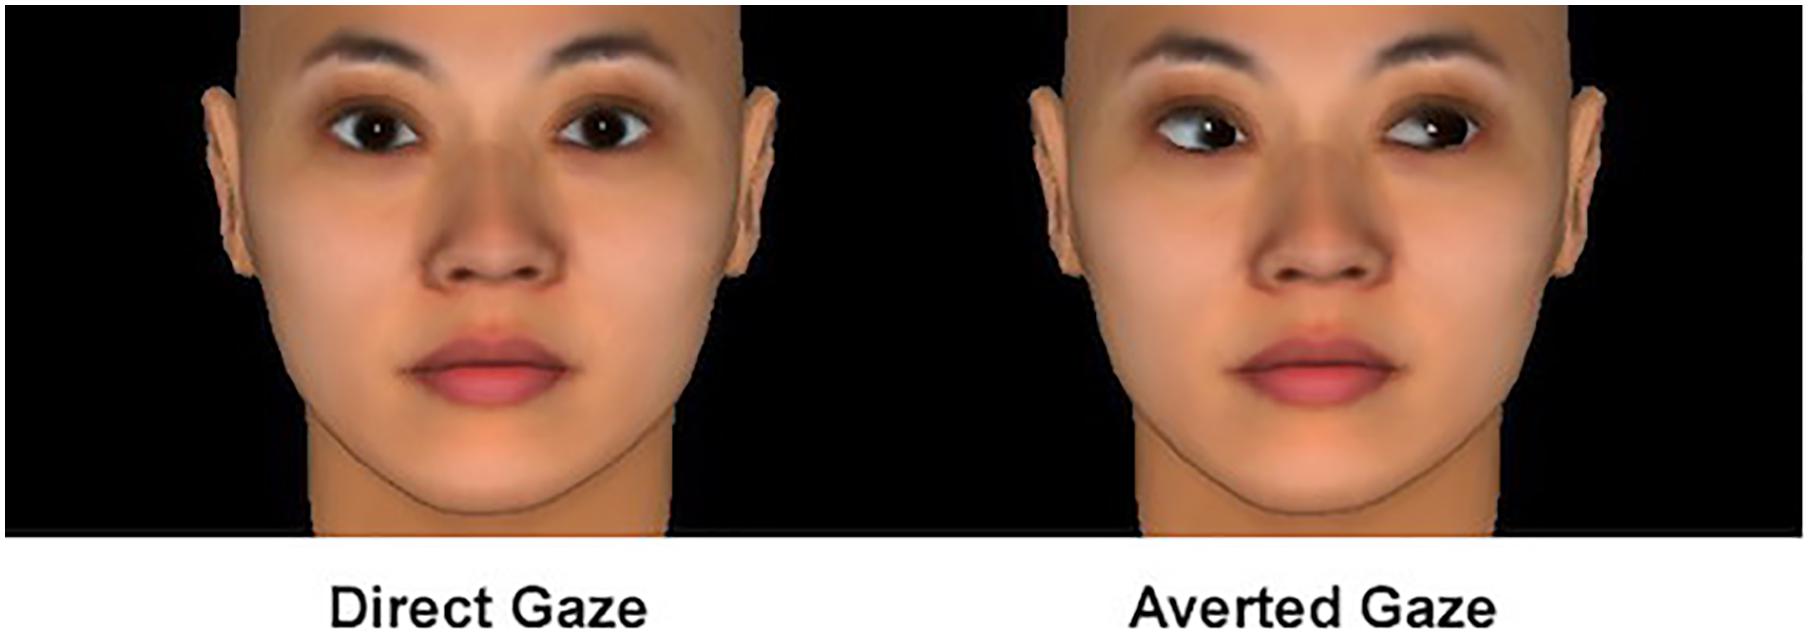 Frontiers | Implicit Perceptions of Closeness From the Direct Eye Gaze